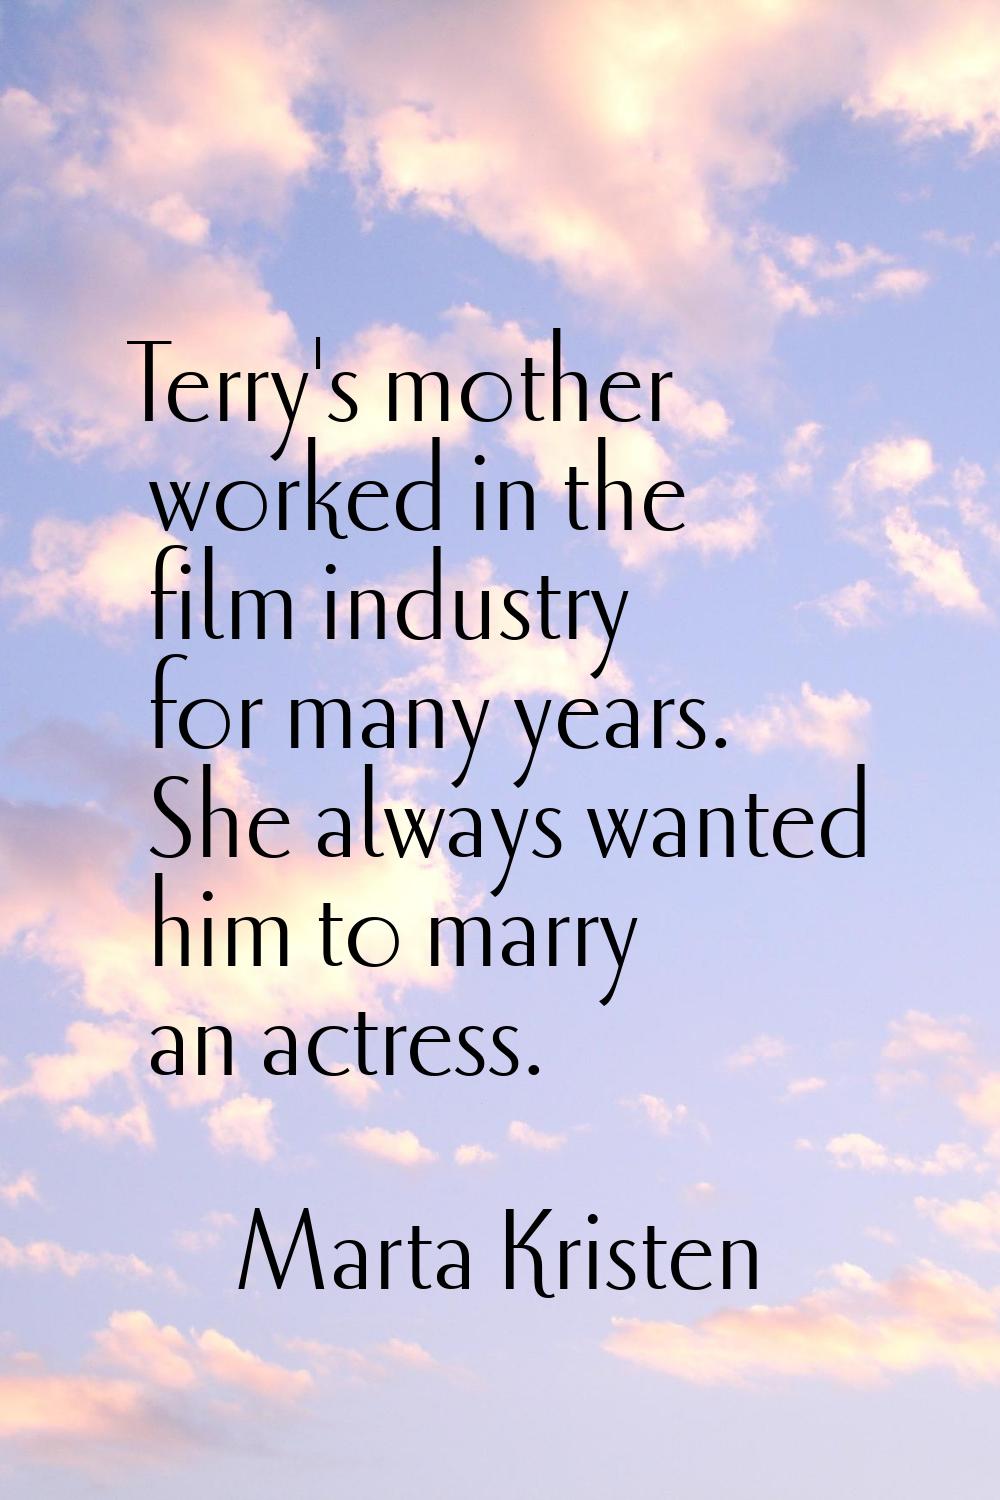 Terry's mother worked in the film industry for many years. She always wanted him to marry an actres